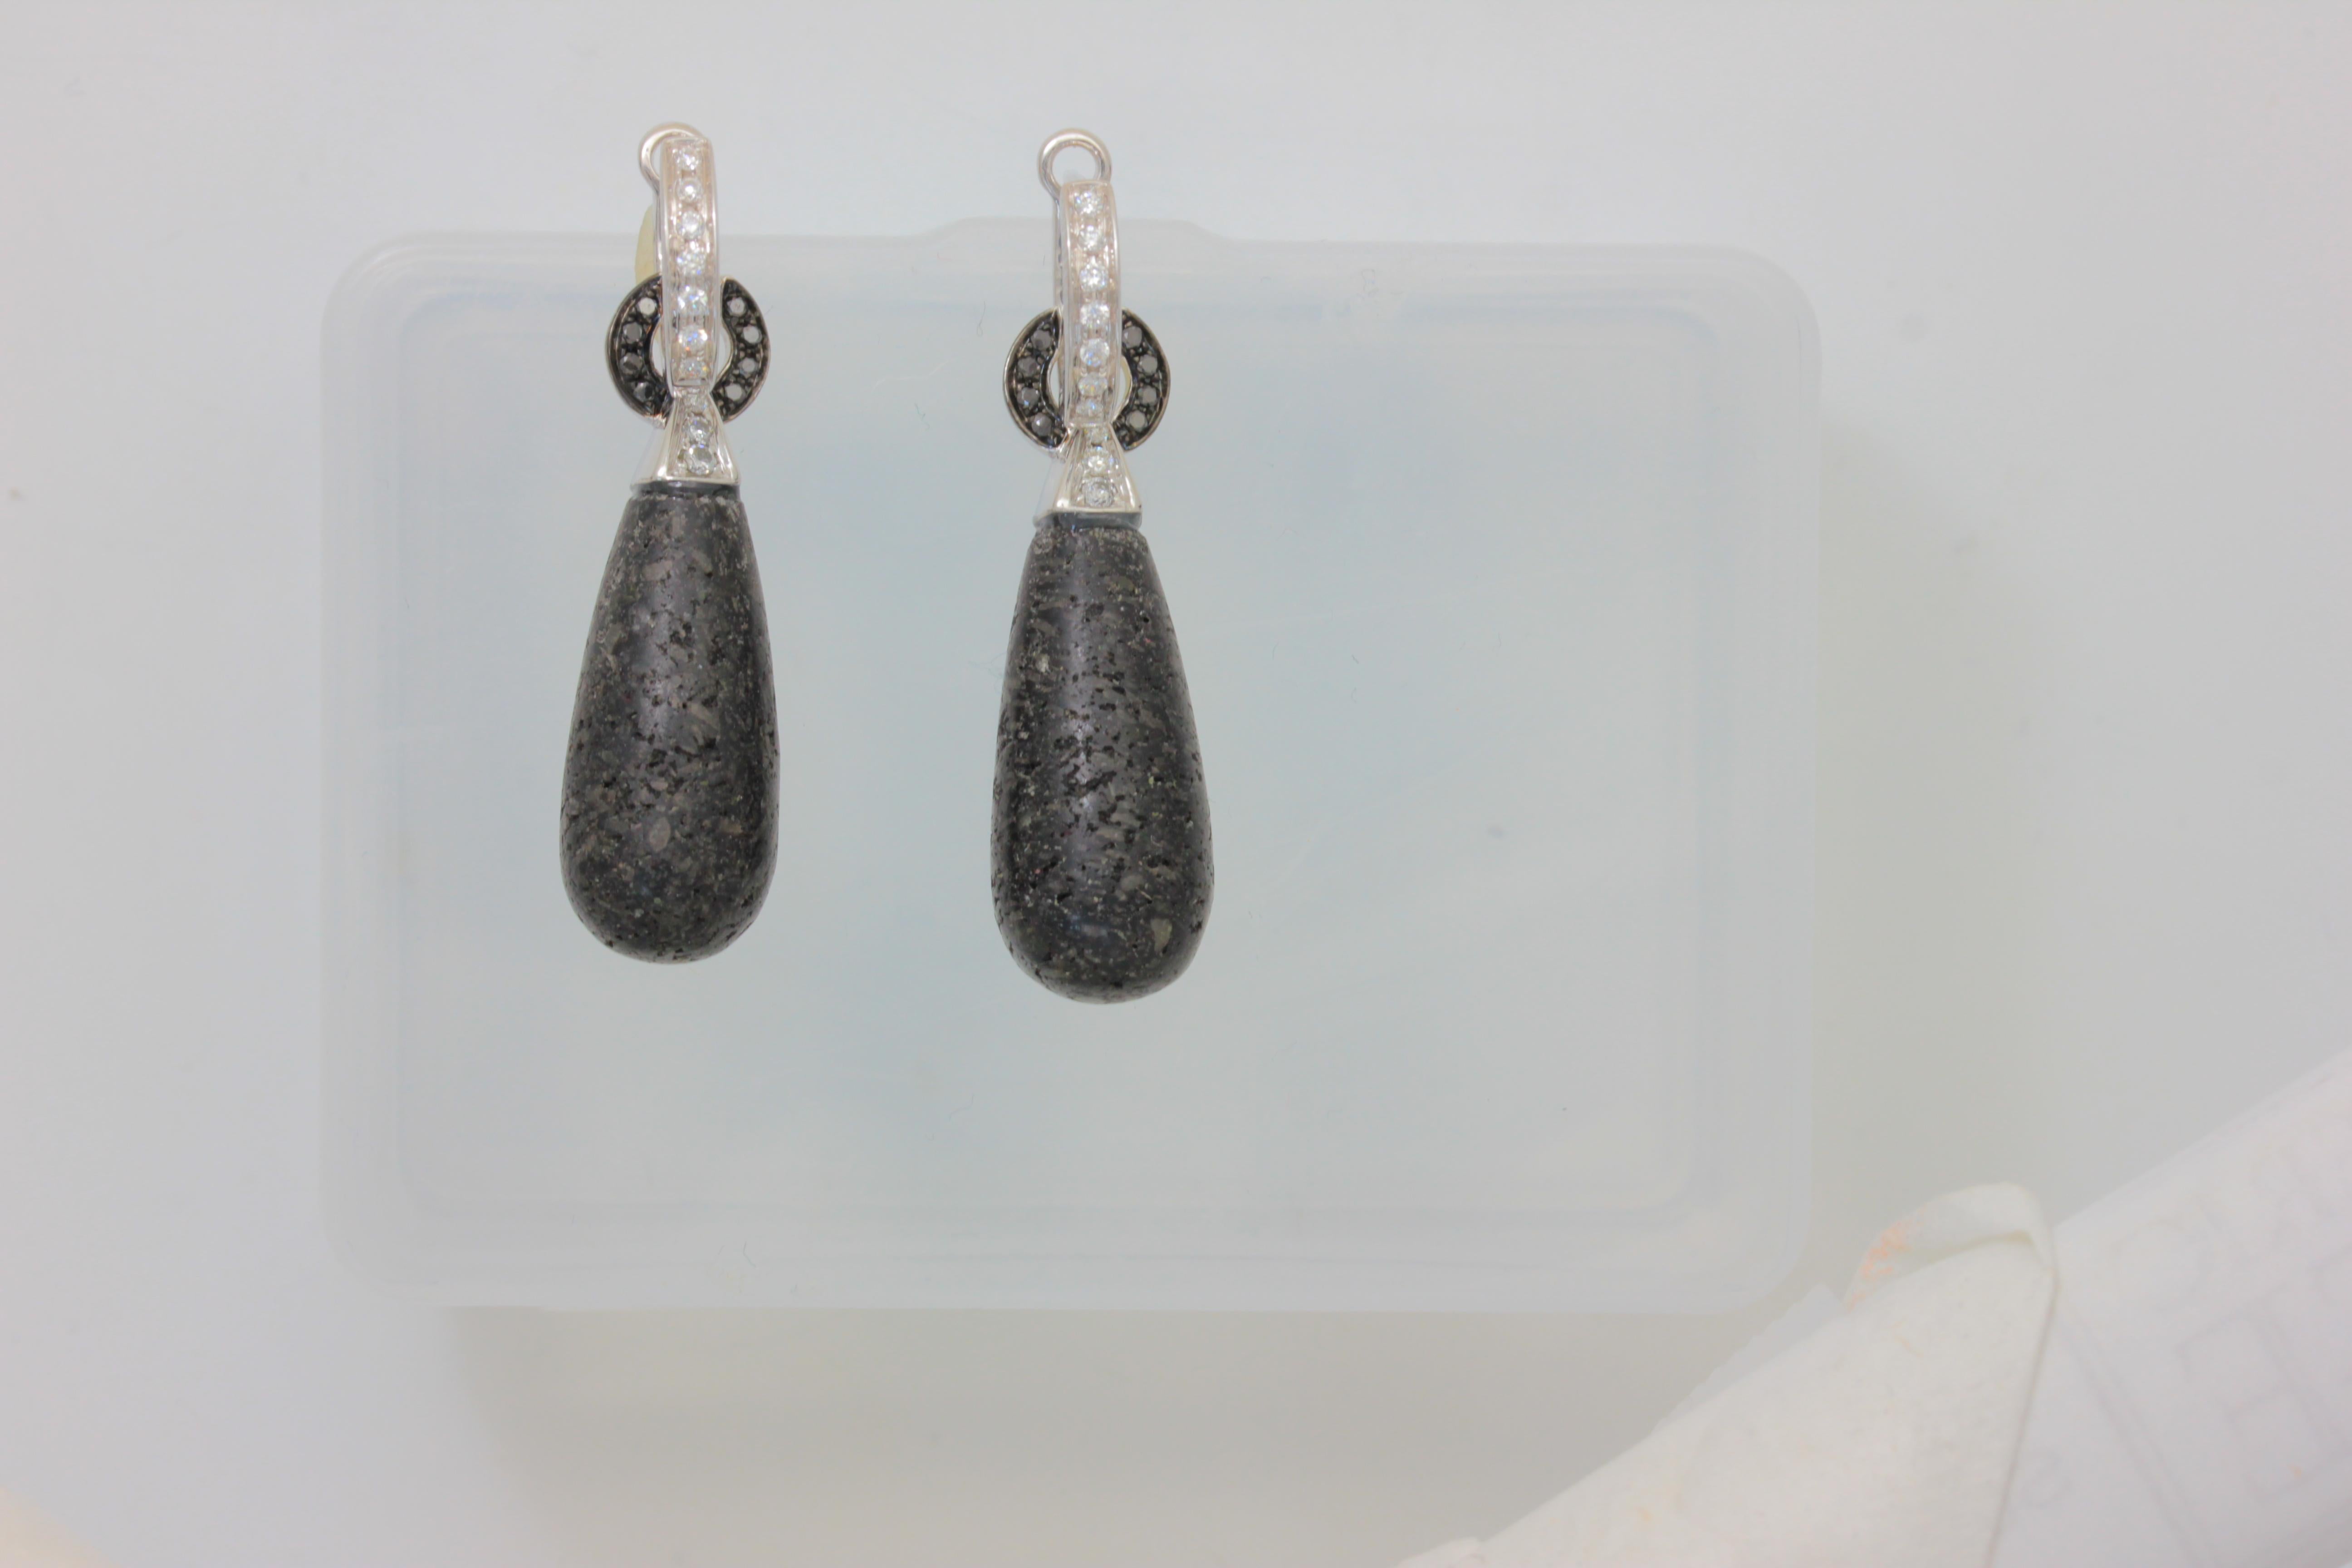 18K WG LAVA DROP WITH BLACK DIAMOND LINK AND WHITE DIAMOND BALE ONE-OF-A-KIND EARRINGS
2 LAVA STONE 3.00 CT
20 DIA 0.22 CT, 16 BLK DIA 0.13 Carrats 